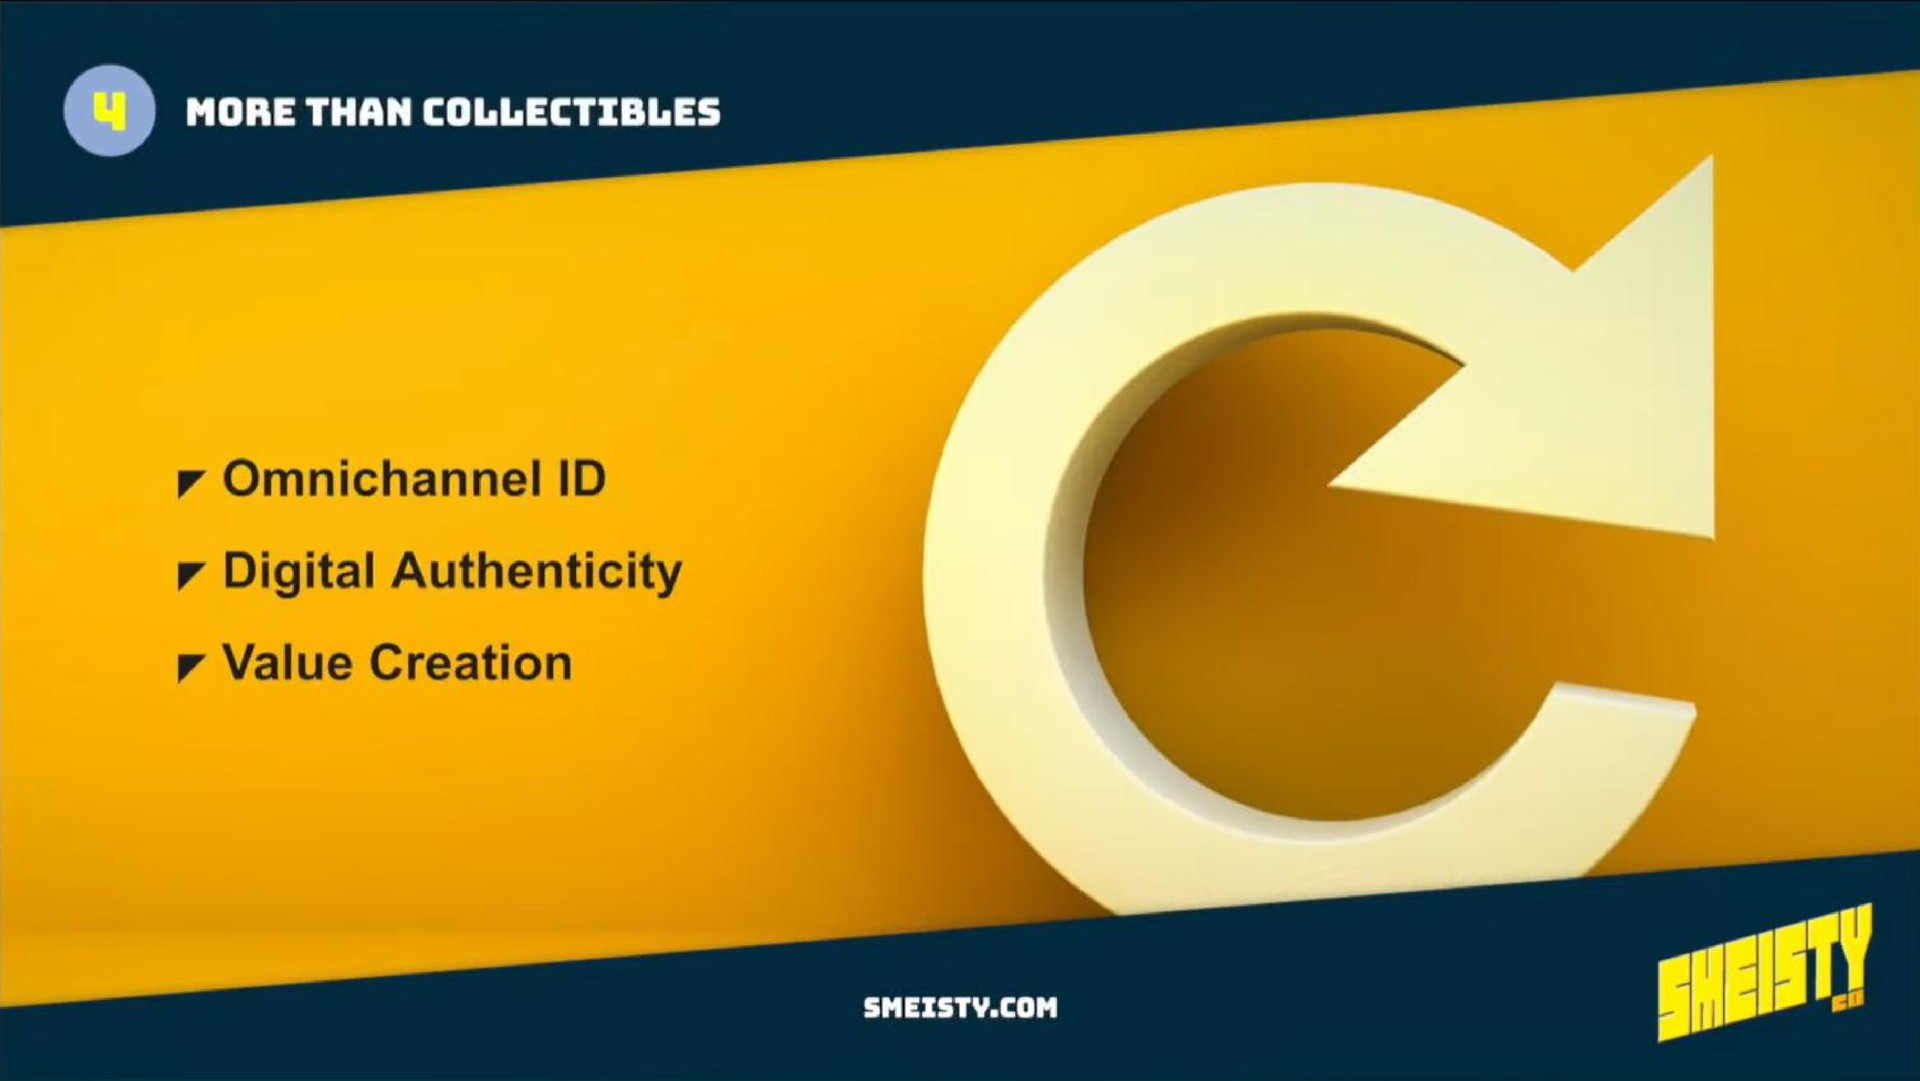 a more than collectibles digital authenticity value creation | Smeisty